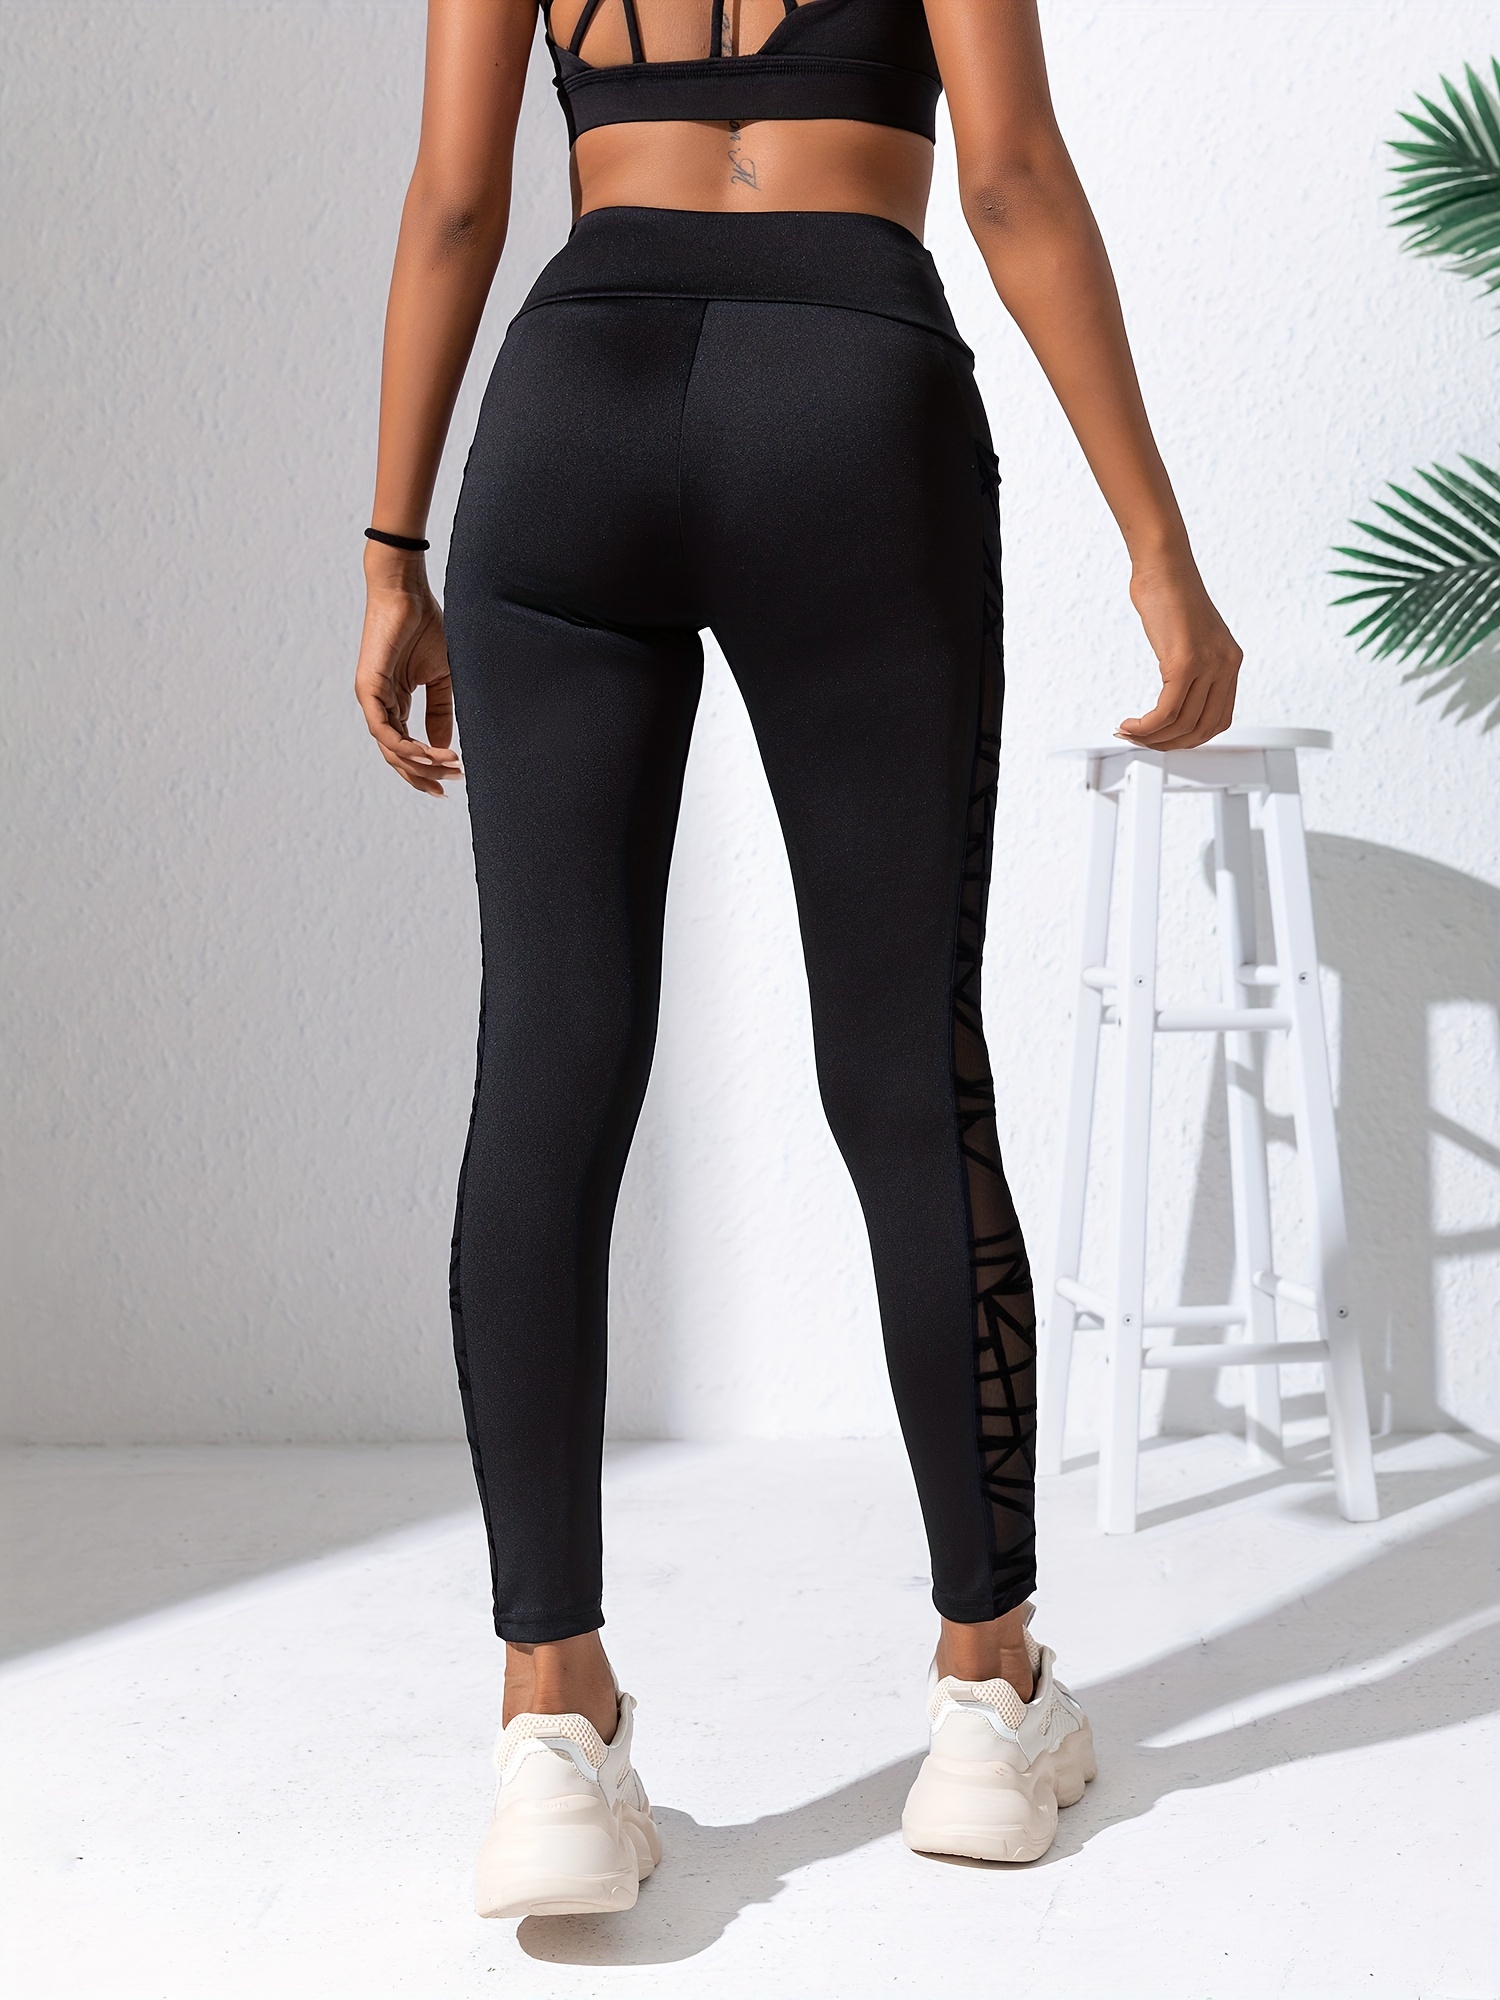 Buy TrainingGirl Mesh Leggings for Women High Waisted Yoga Pants Workout  Running Printed Leggings Gym Sports Tights with Pockets (Black, Medium) at